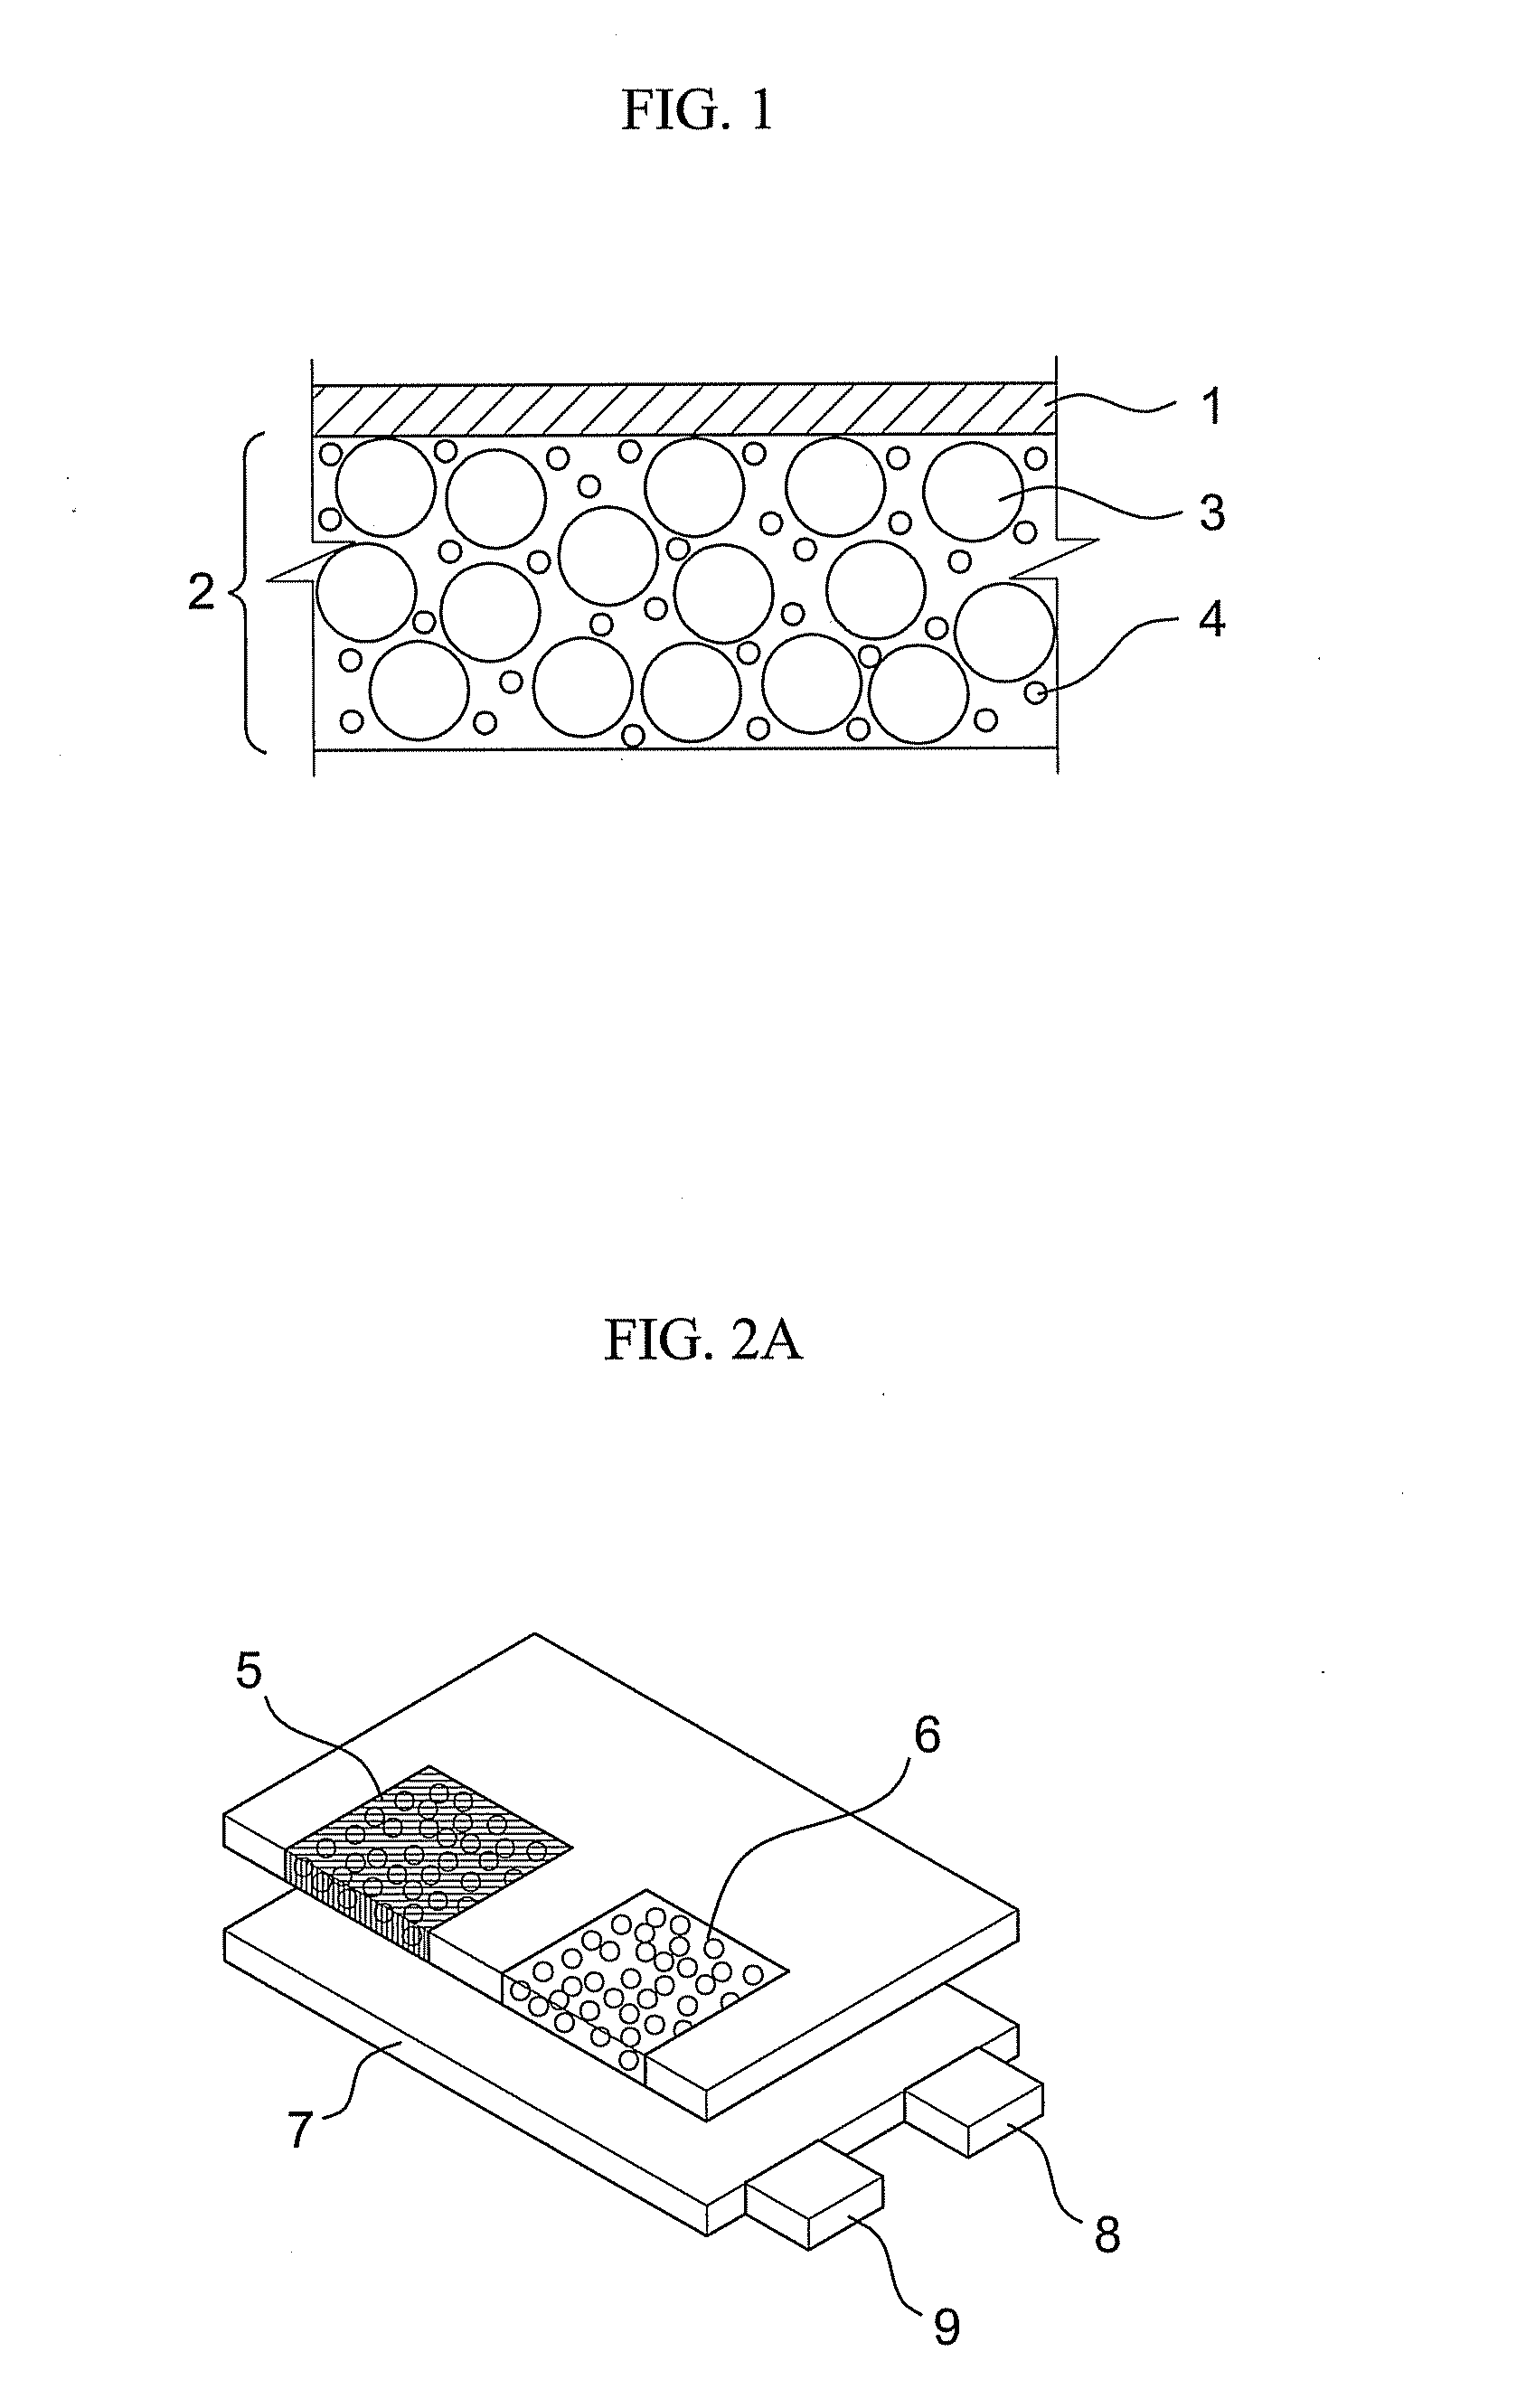 Image display device with plural light emitting diodes